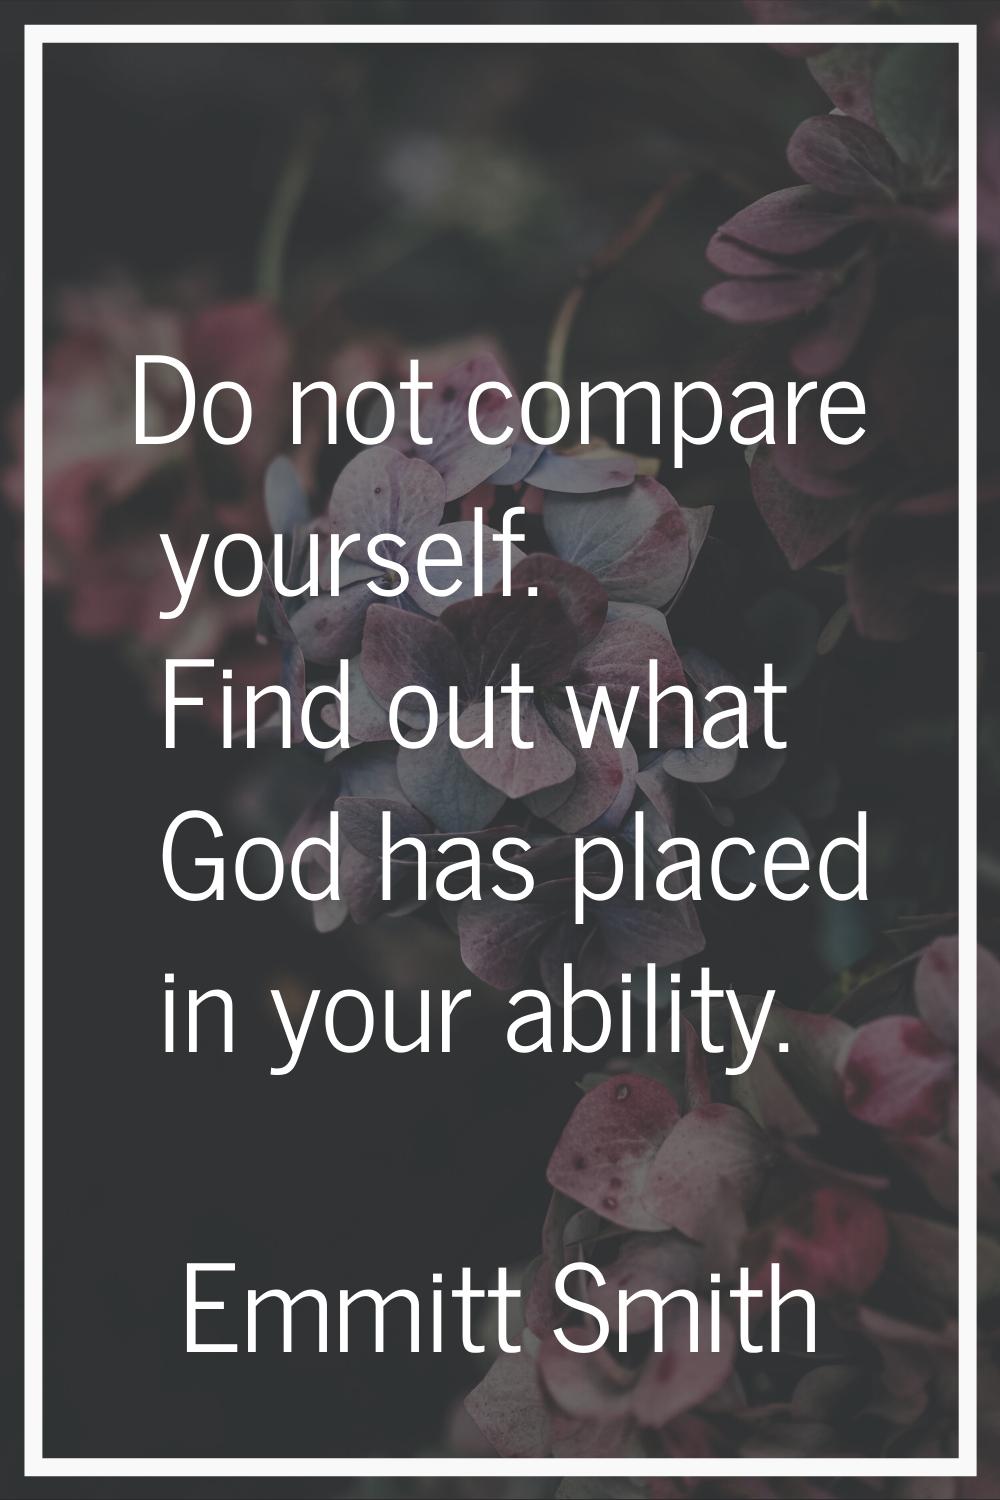 Do not compare yourself. Find out what God has placed in your ability.